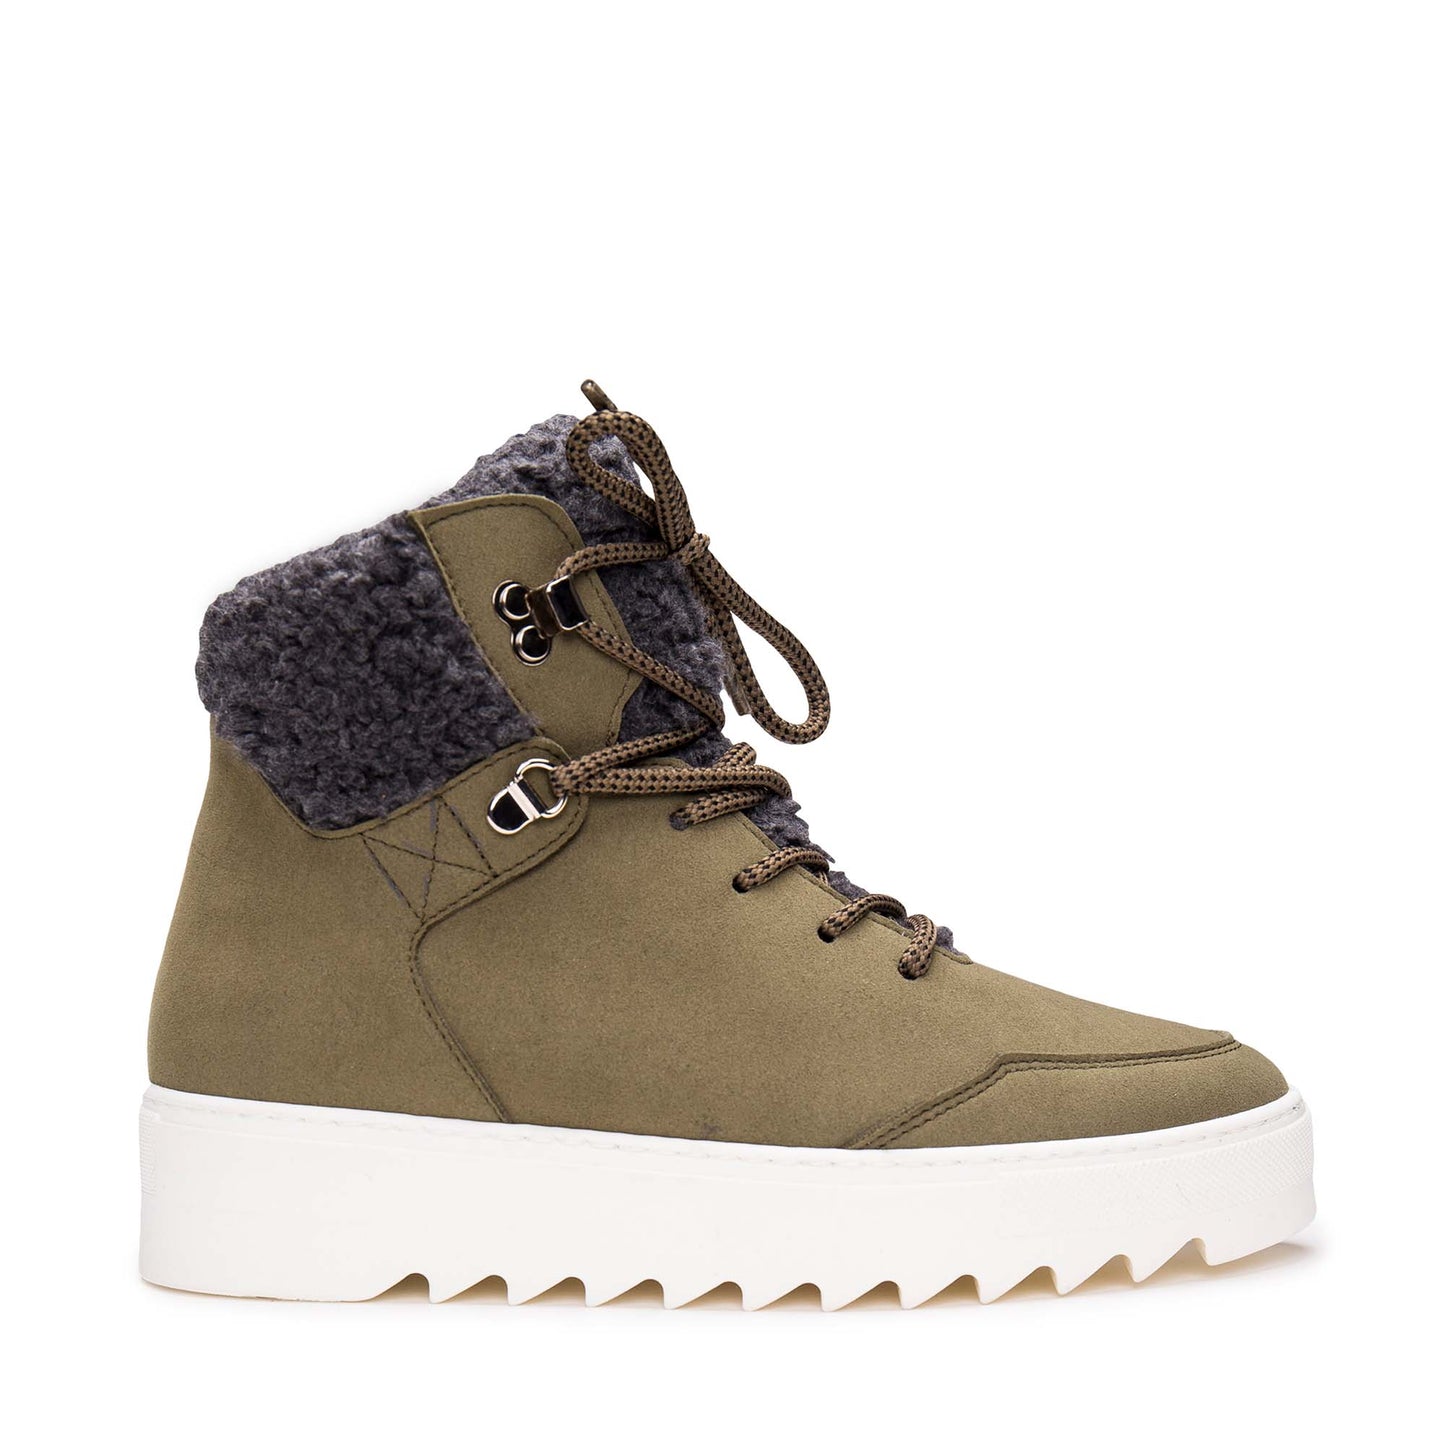 Bego Suede vegan warm ankle boot